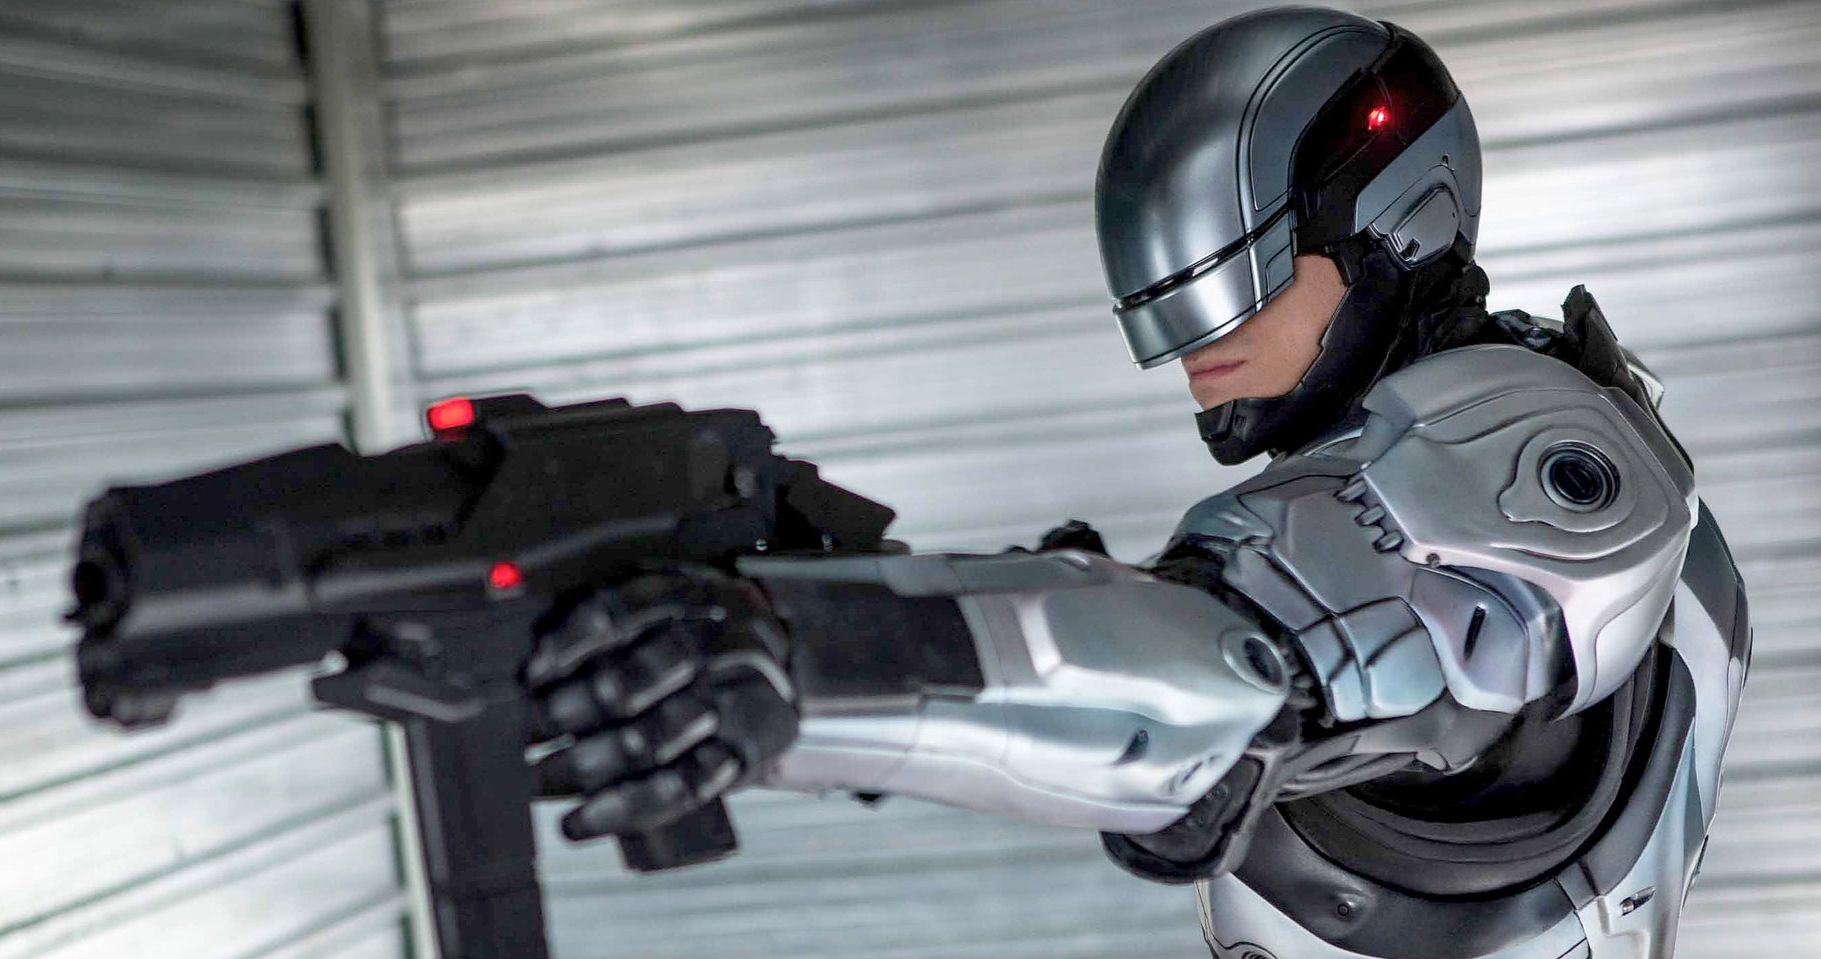 Why the Robocop Remake Failed with Fans According to Joel Kinnaman